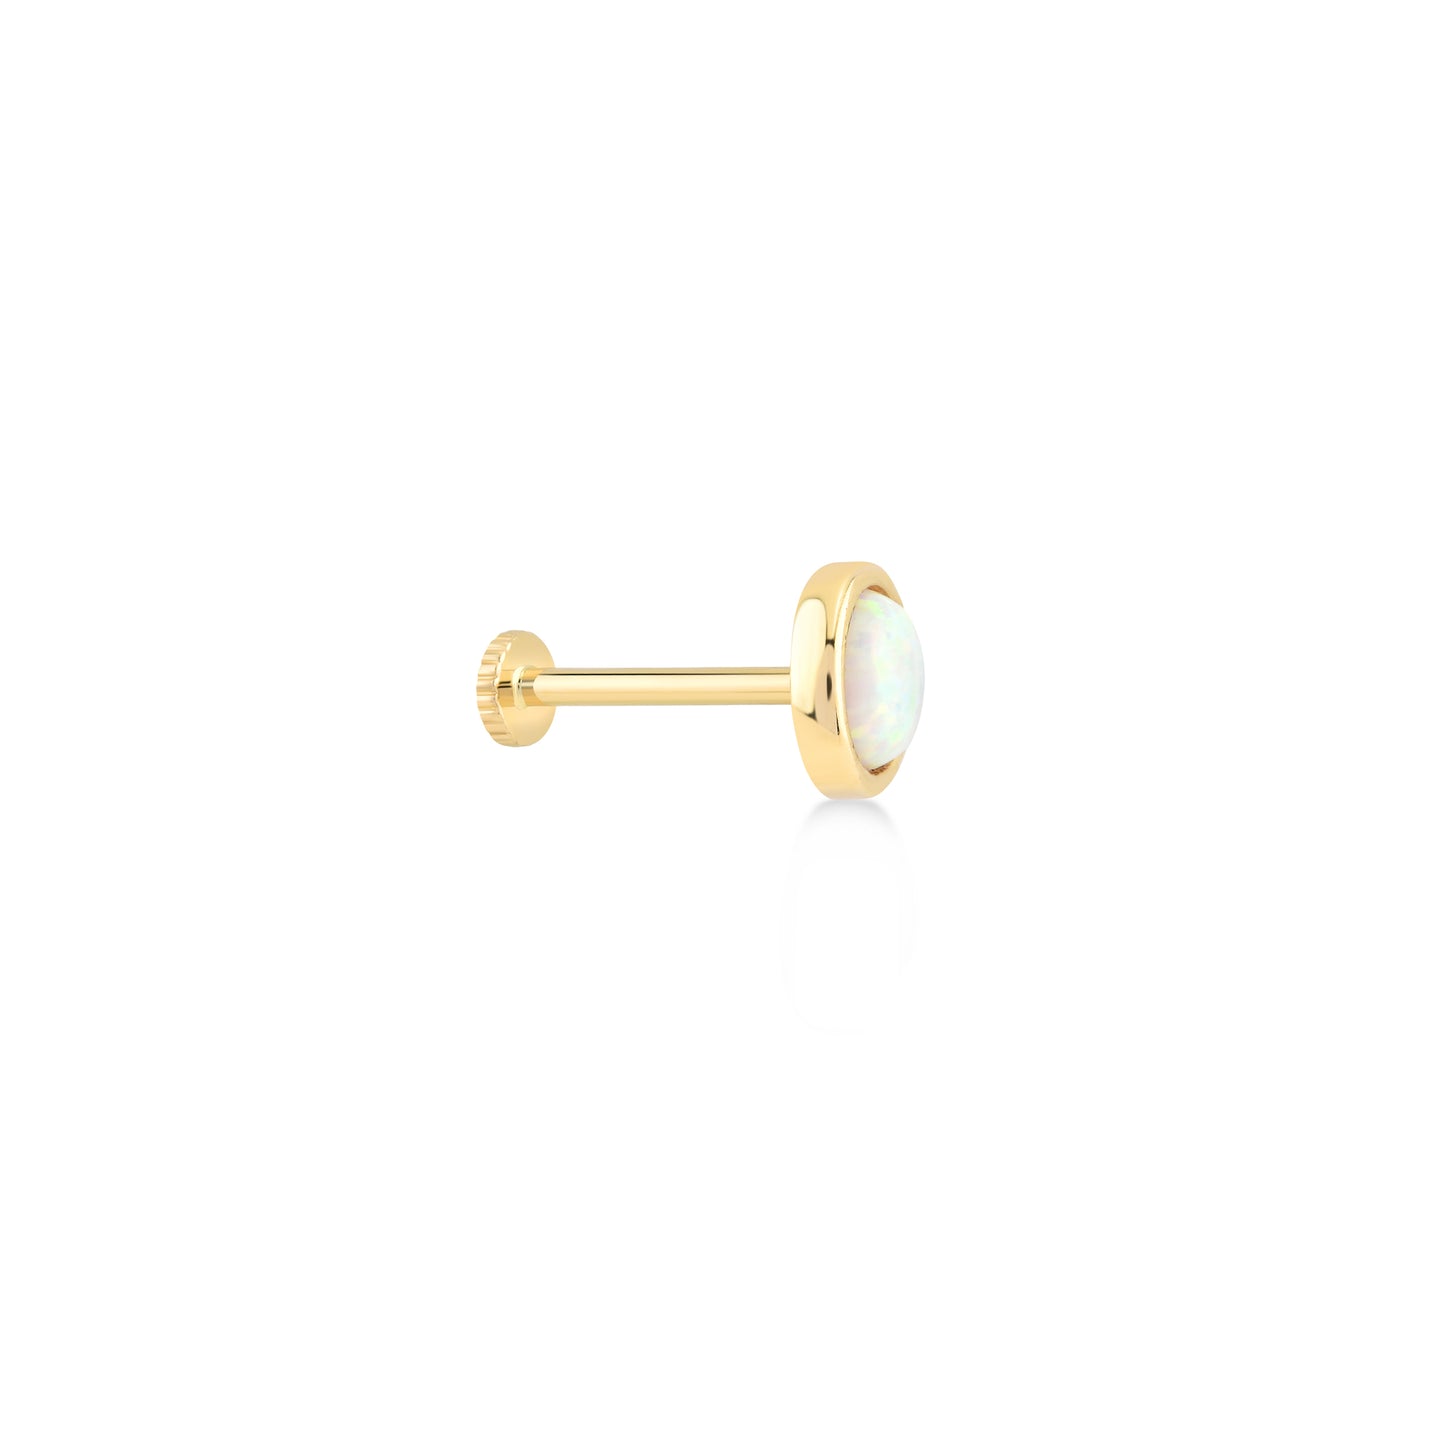 Handcrafted Single Opal Stone Piercing in Round Shape